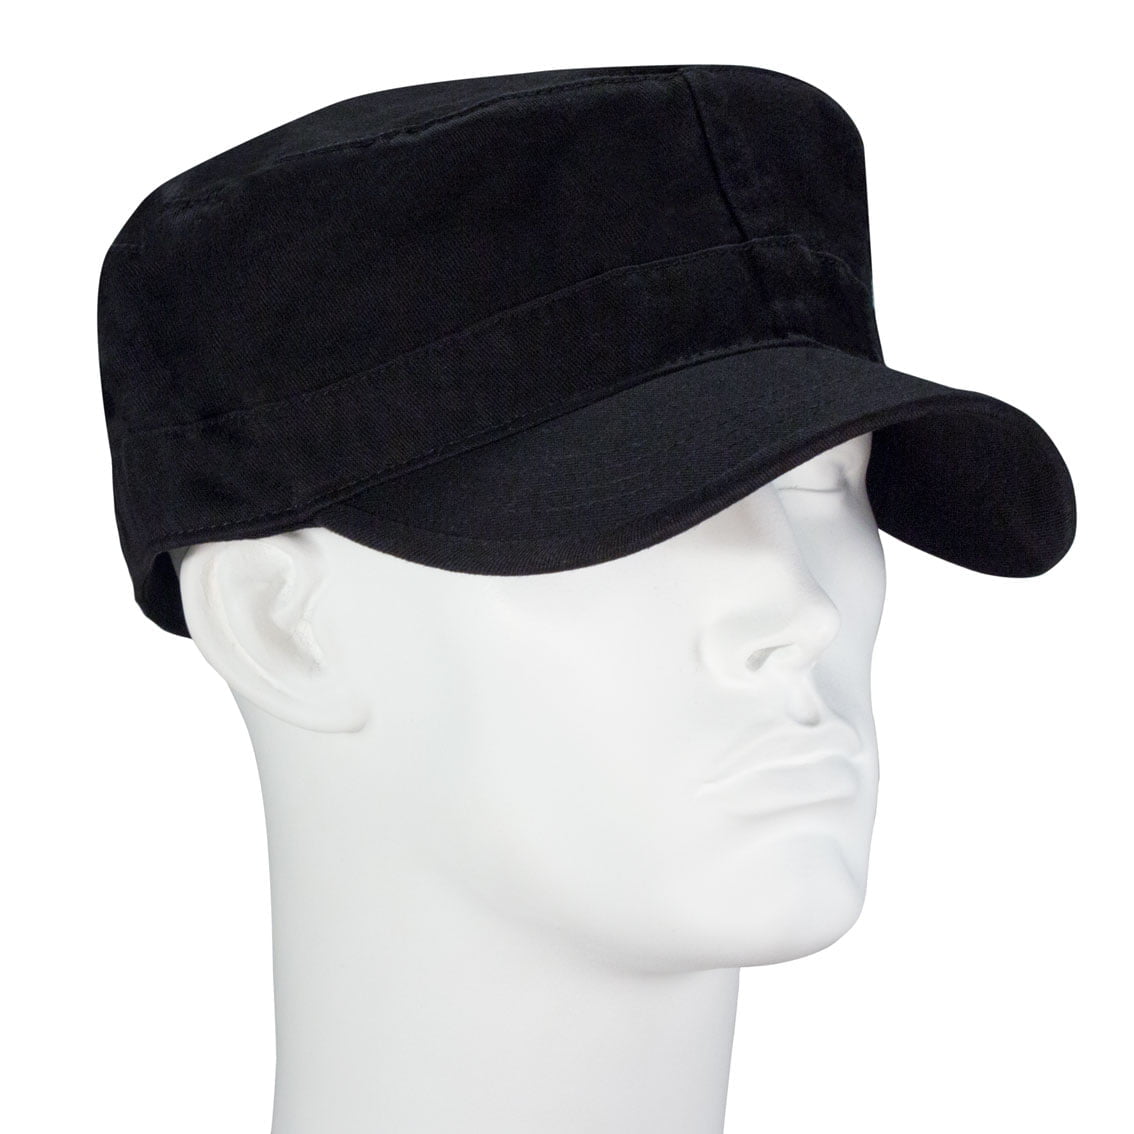 12pcs Black Solid Castro Military Fatigue Army Hats - Fitted - Unconstructed - 100% Cotton - Bulk by the Dozen - Wholesale